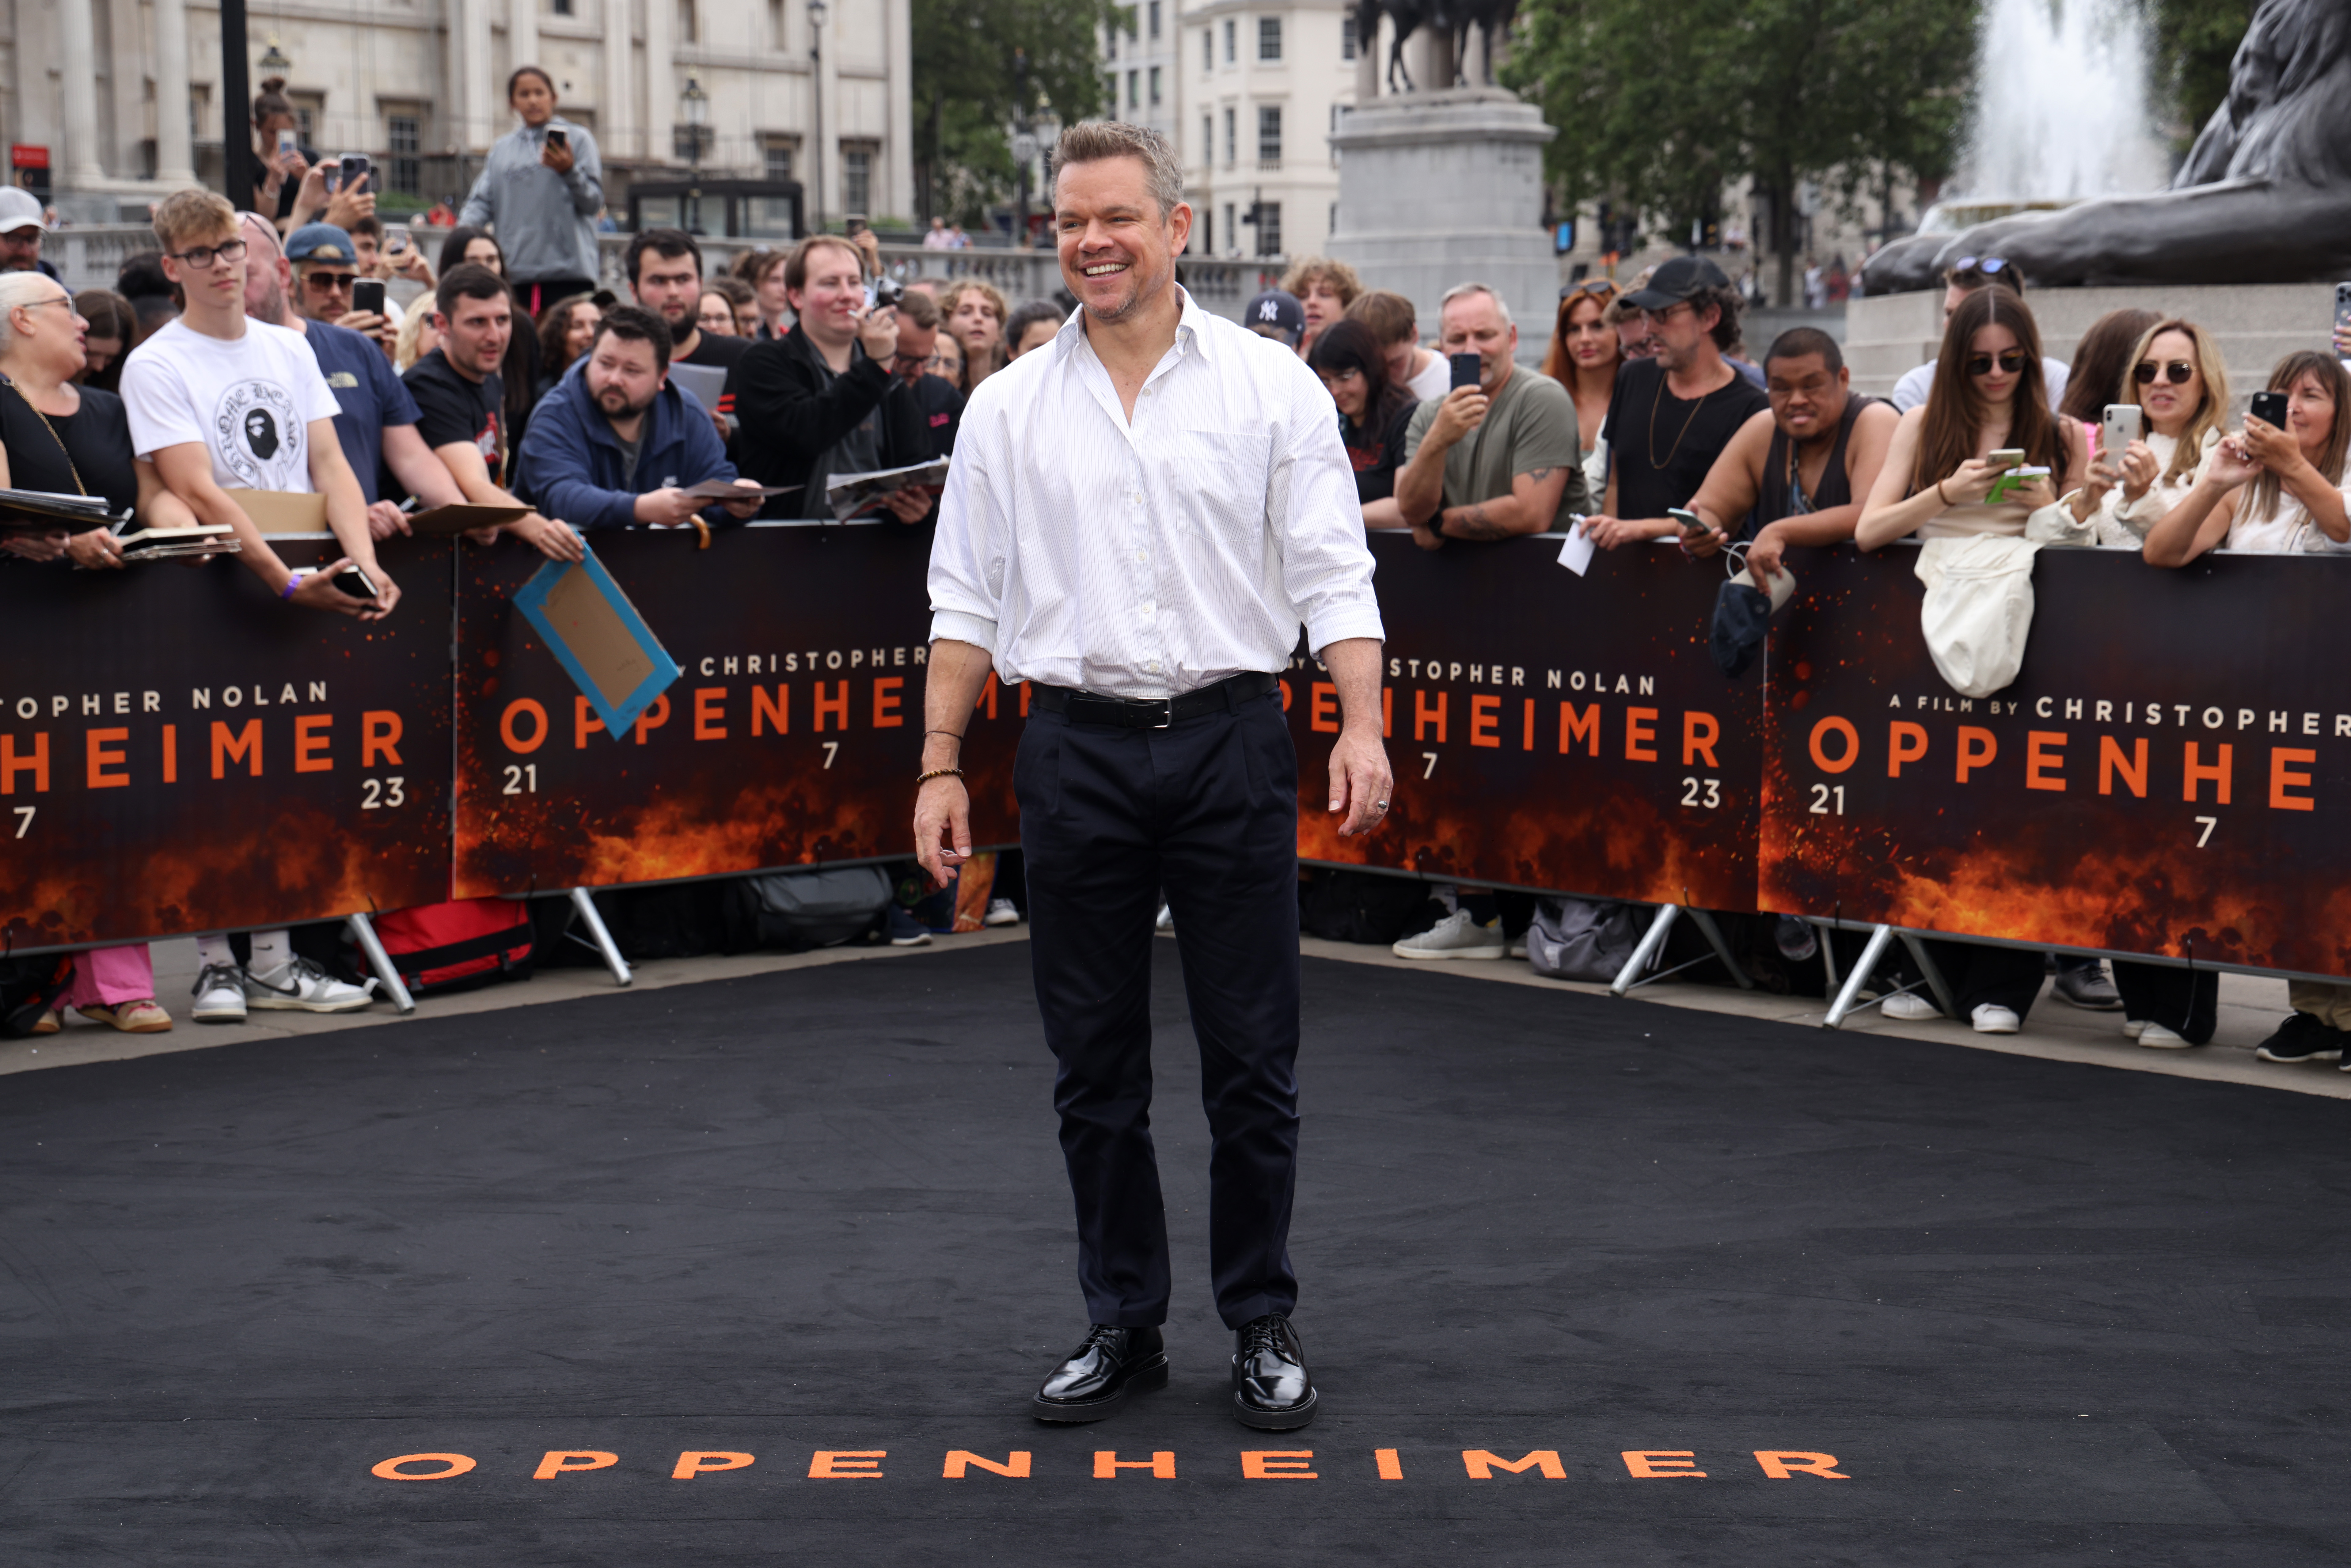 Matt Damon at the London photocall for "Oppenheimer" at Trafalgar Square on July 12, 2023 in London, England. | Source: Getty Images